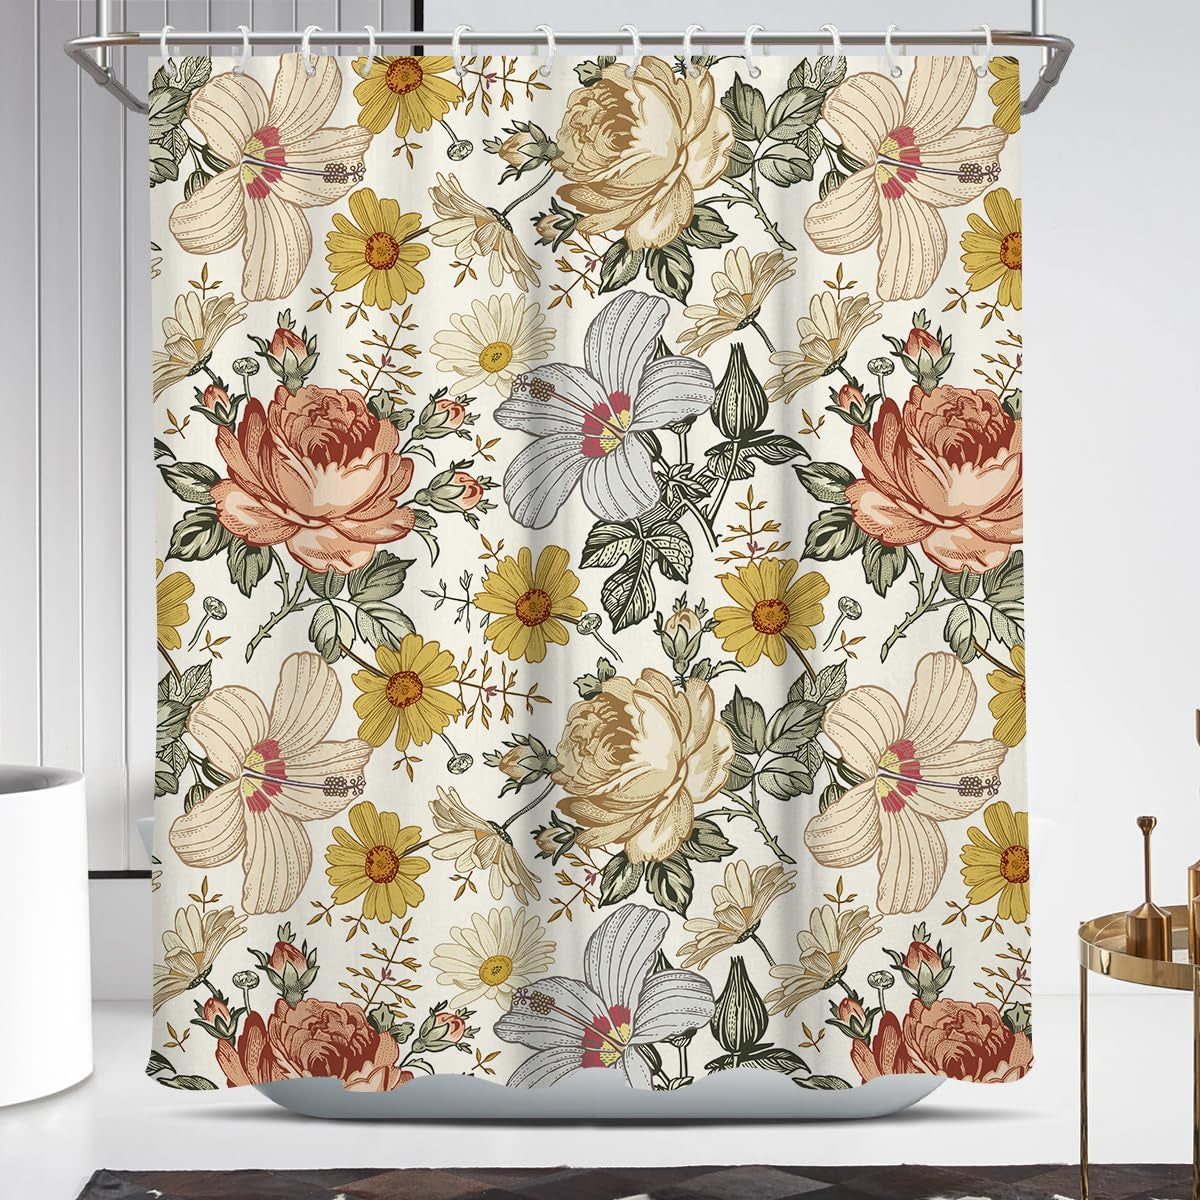 Coxila Floral Shower Curtain Vintage Flower Retro Plant Watercolor Dark Mustard Yellow Colorful Peony Pale Printed 60 X 72 Inch Polyester Fabric Waterproof 12 Pack Hooks